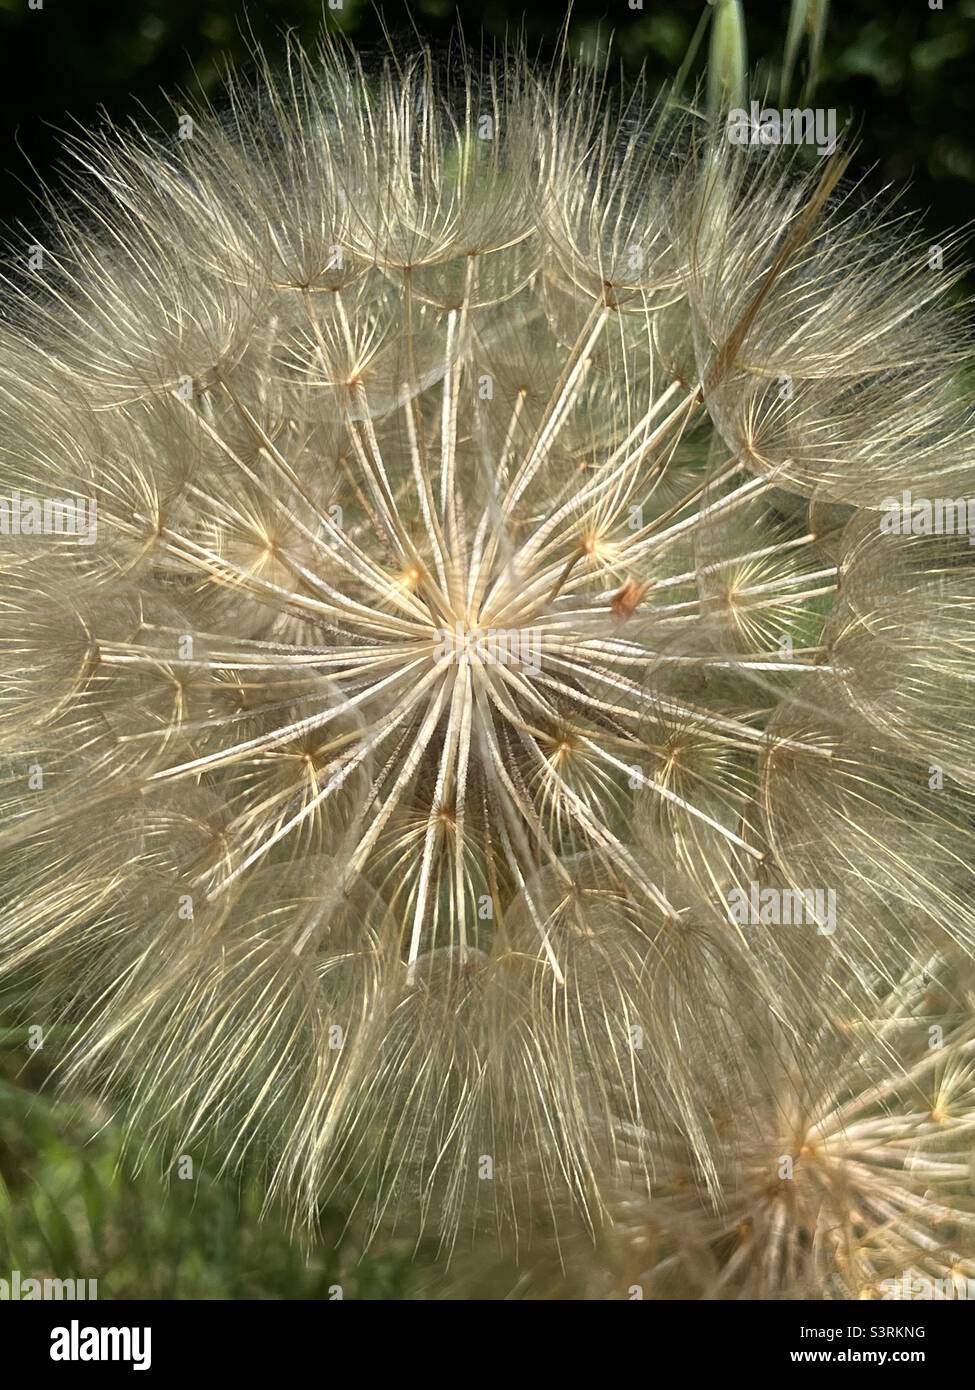 Dandelion flower with many seeds, closeup view Stock Photo